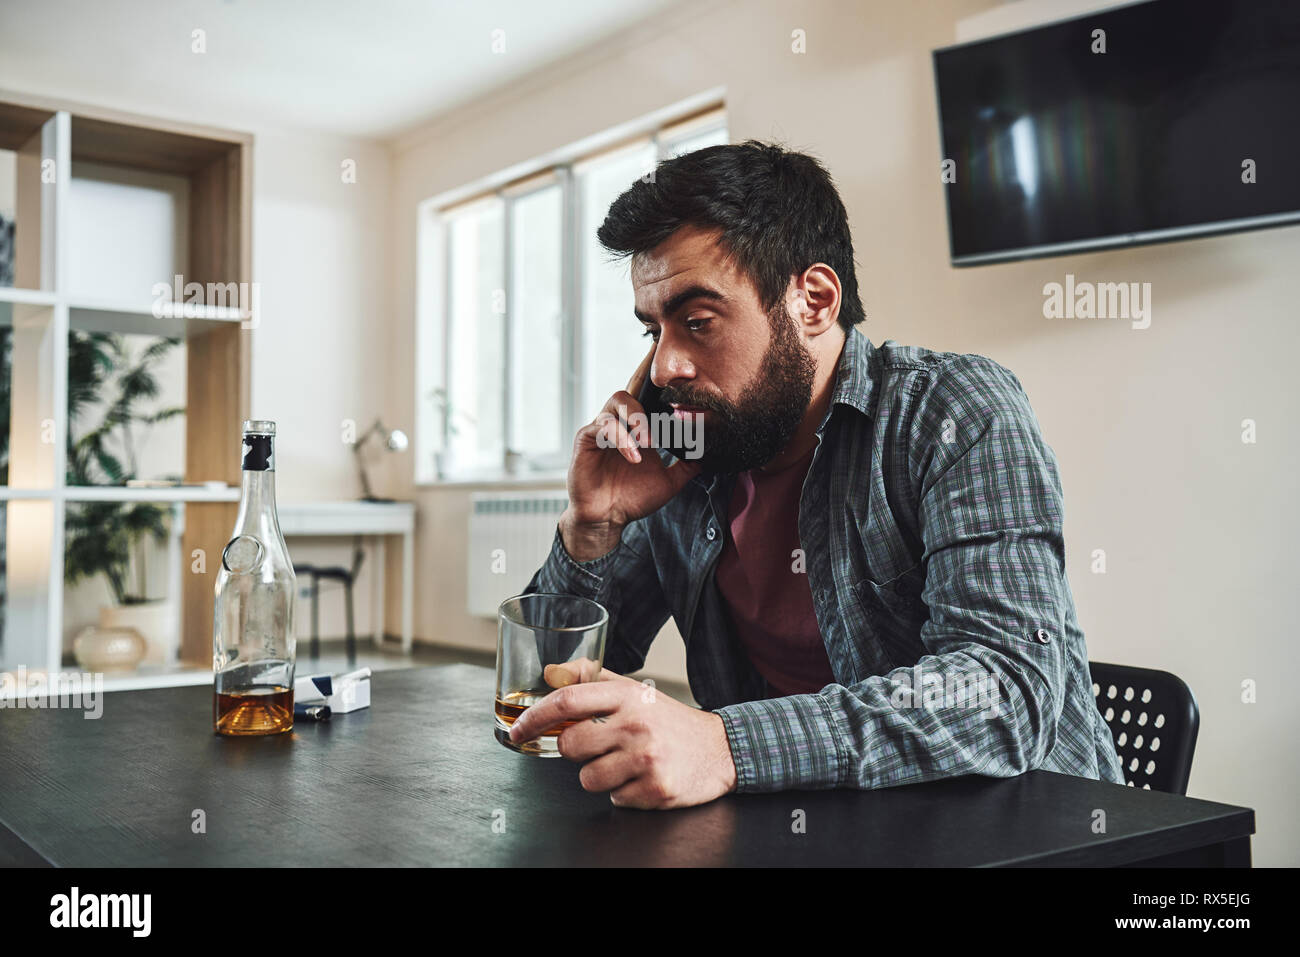 Portrait of young man in despair, sitting at table, drinking alcohol at home. He holds an empty glass while talking on the phone. Male alcoholism conc Stock Photo